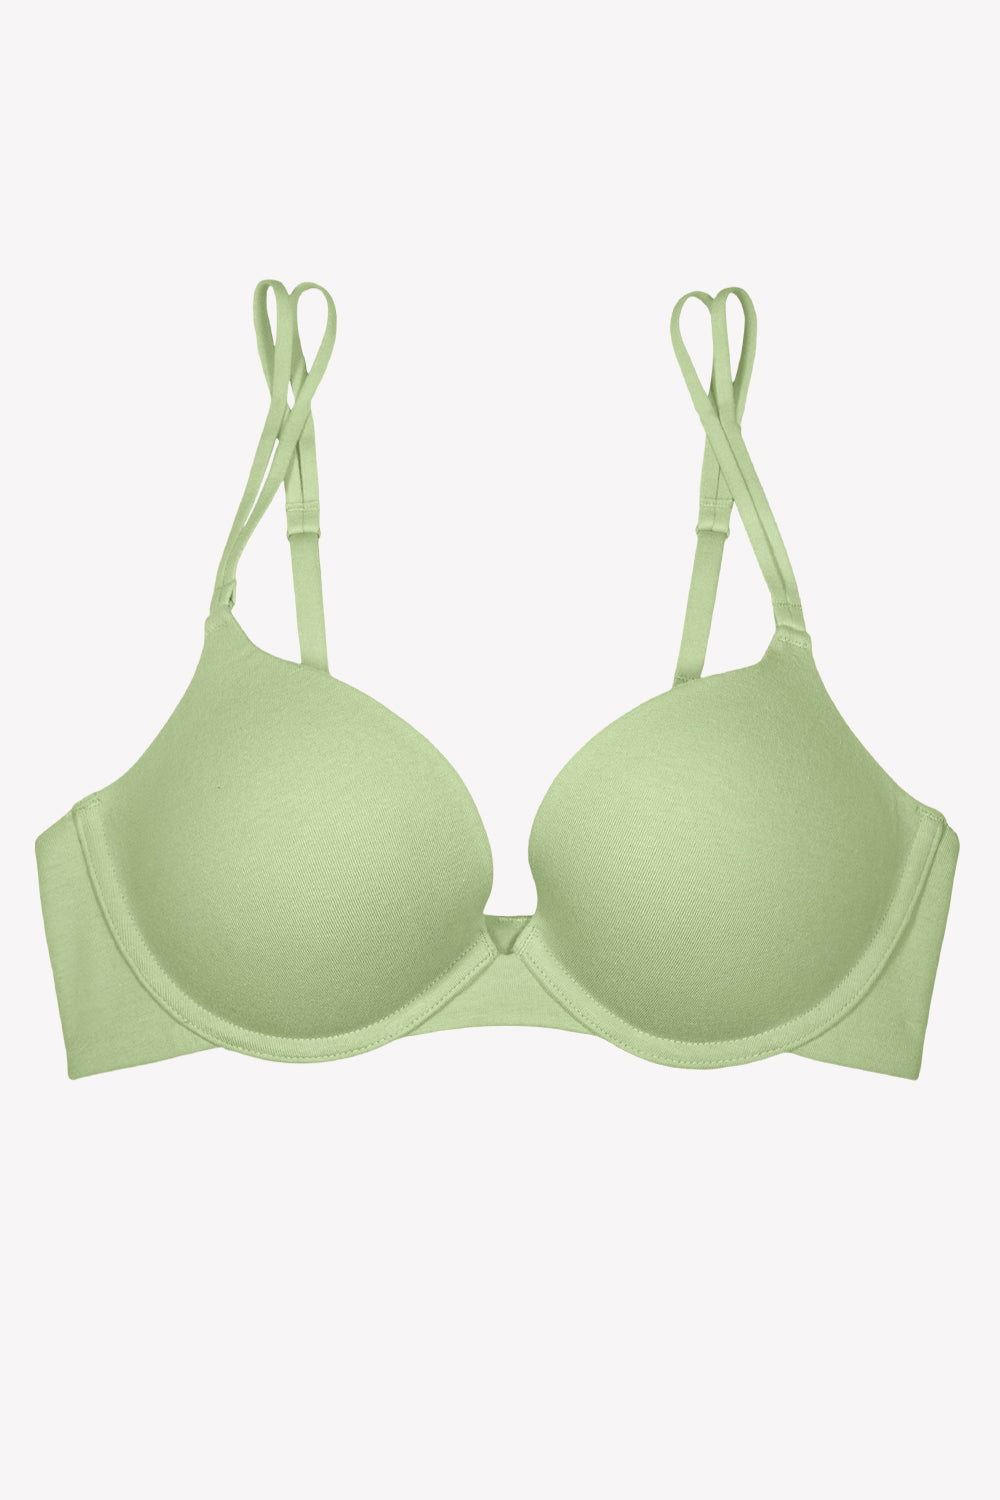 Cotton Push-Up Ladies Non Padded Olive Green Bra, Plain at Rs 99